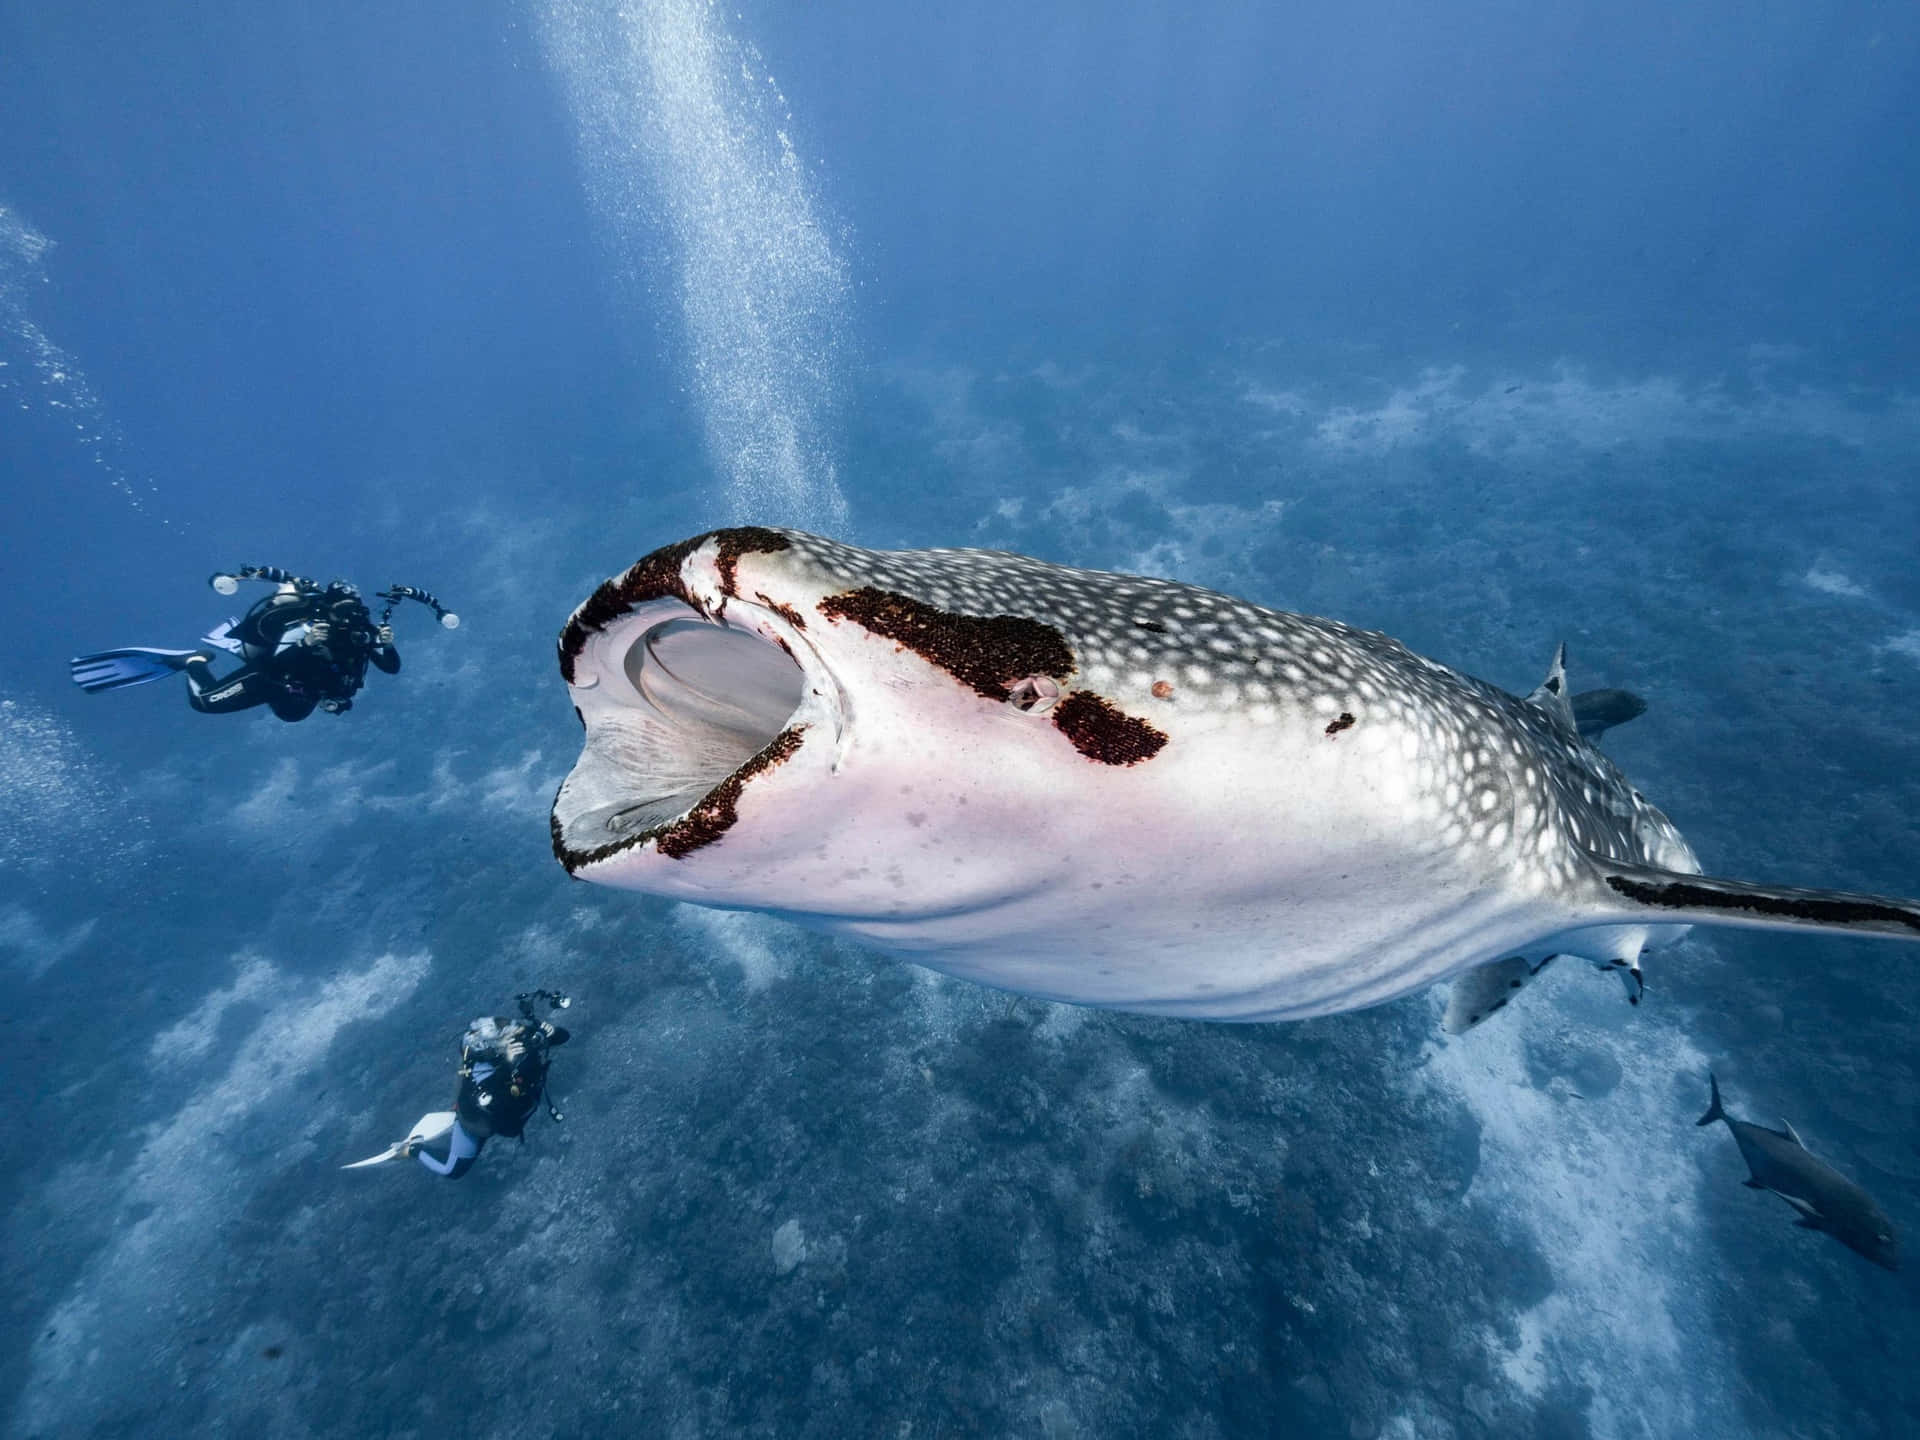 Admire the beauty of a majestic whale shark